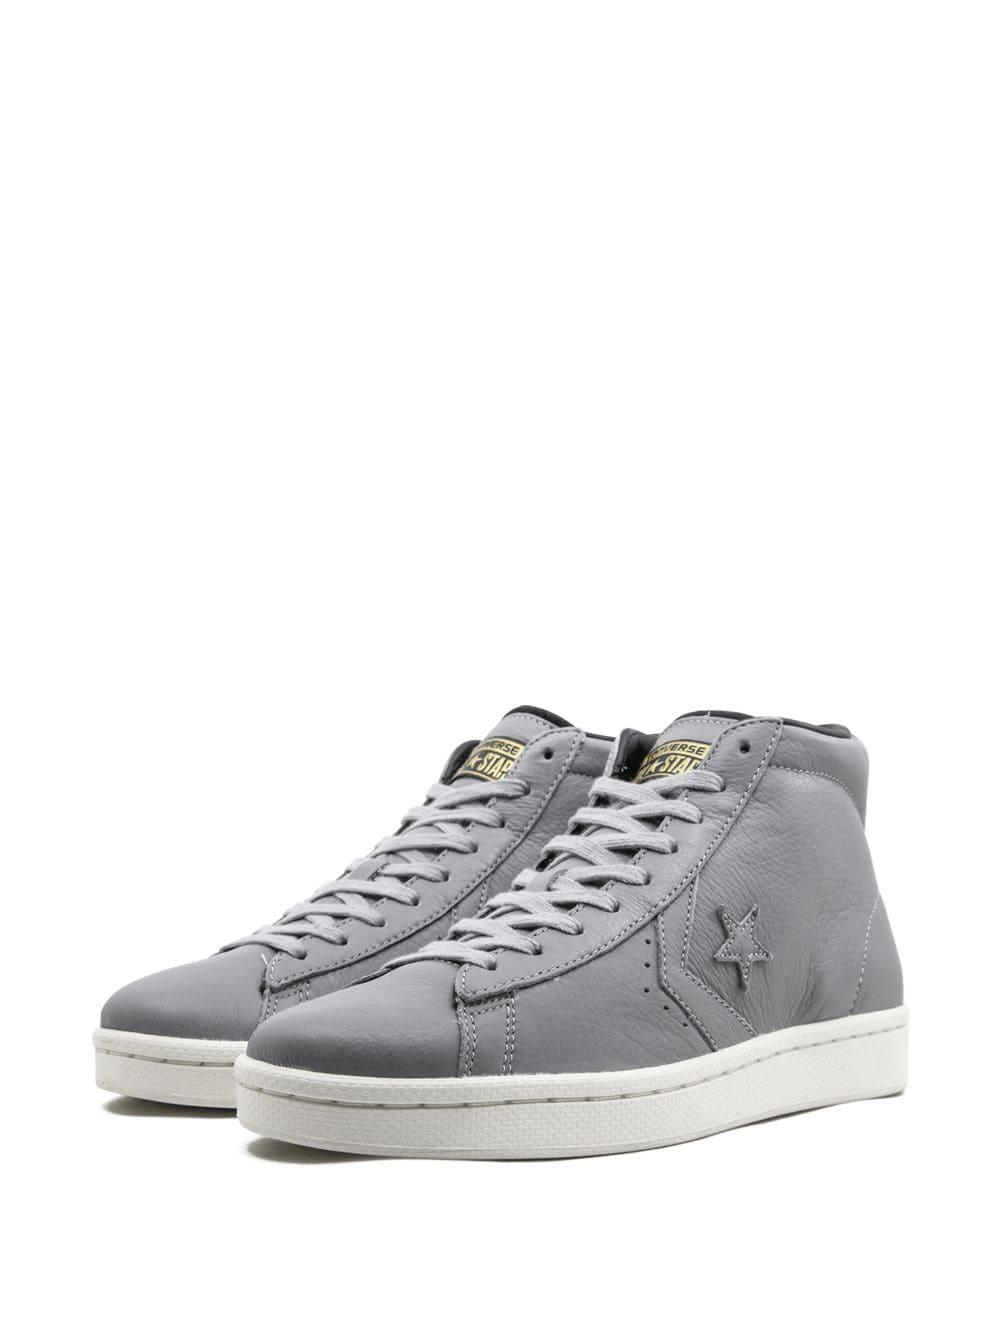 Converse Pro Leather 76 Mid Sneakers in Grey (Gray) for Men - Lyst